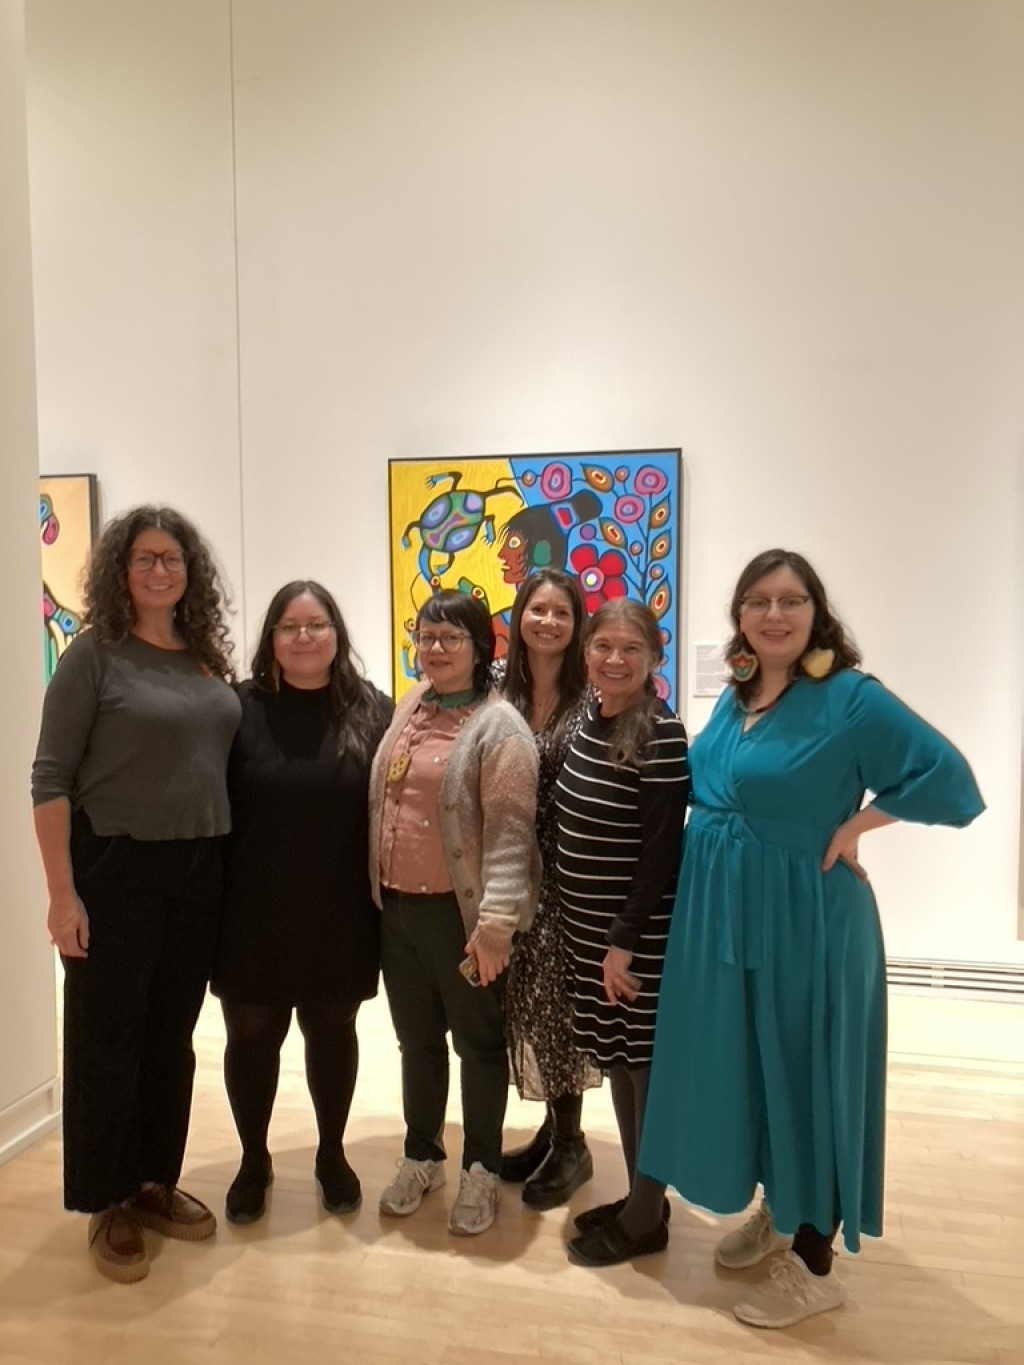 Photograph of 7 female artists in front of Morrisseau's painting in a gallery